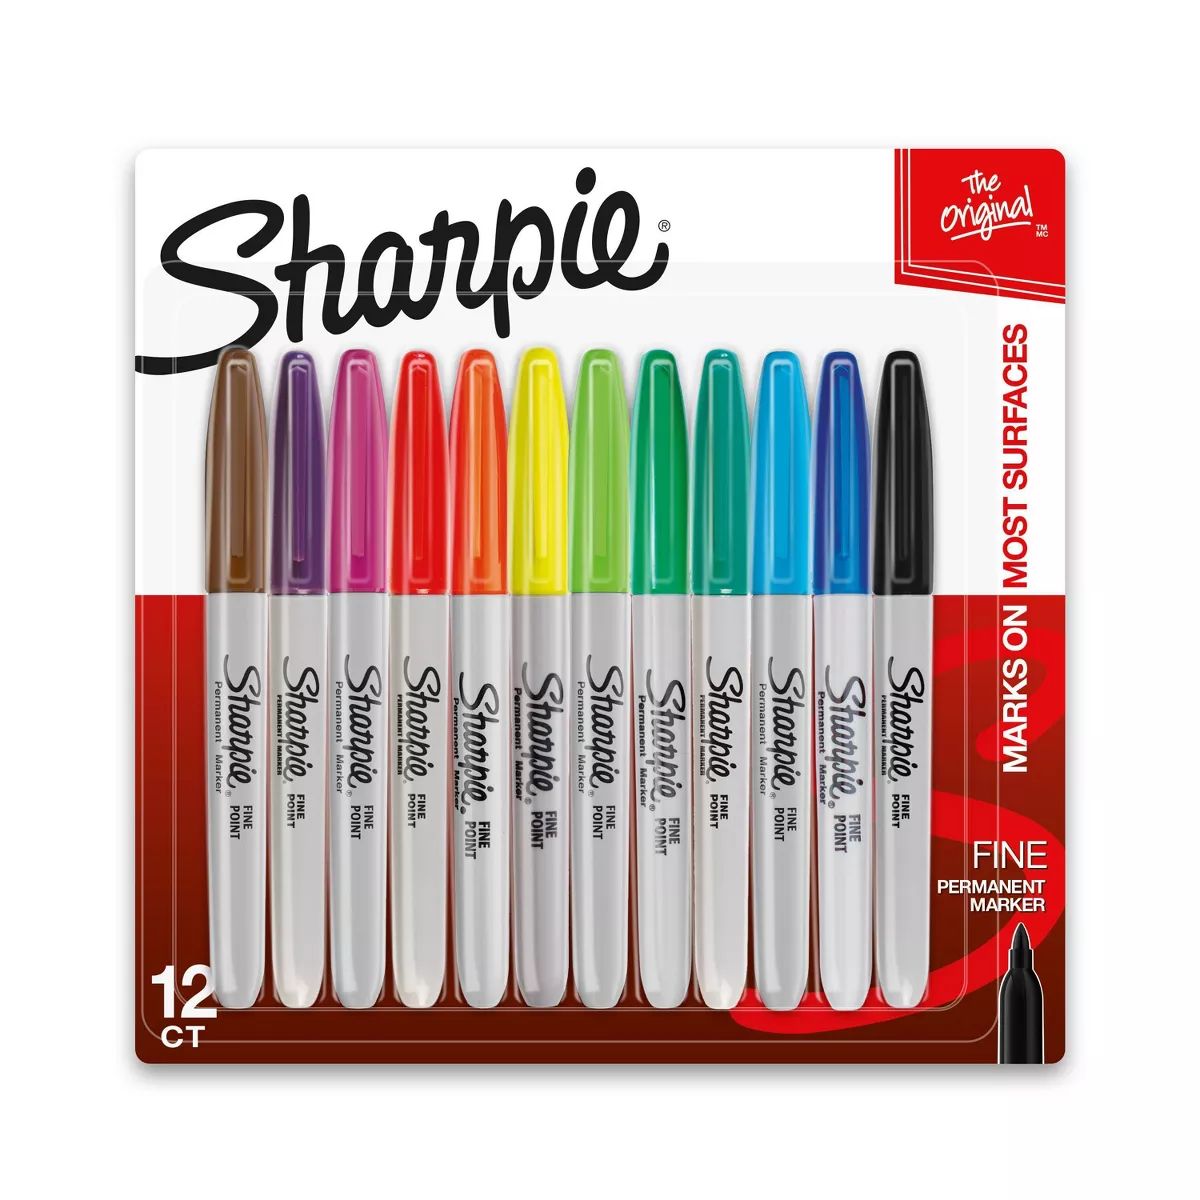 Sharpie 12pk Permanent Markers Fine Tip Multicolored | Target